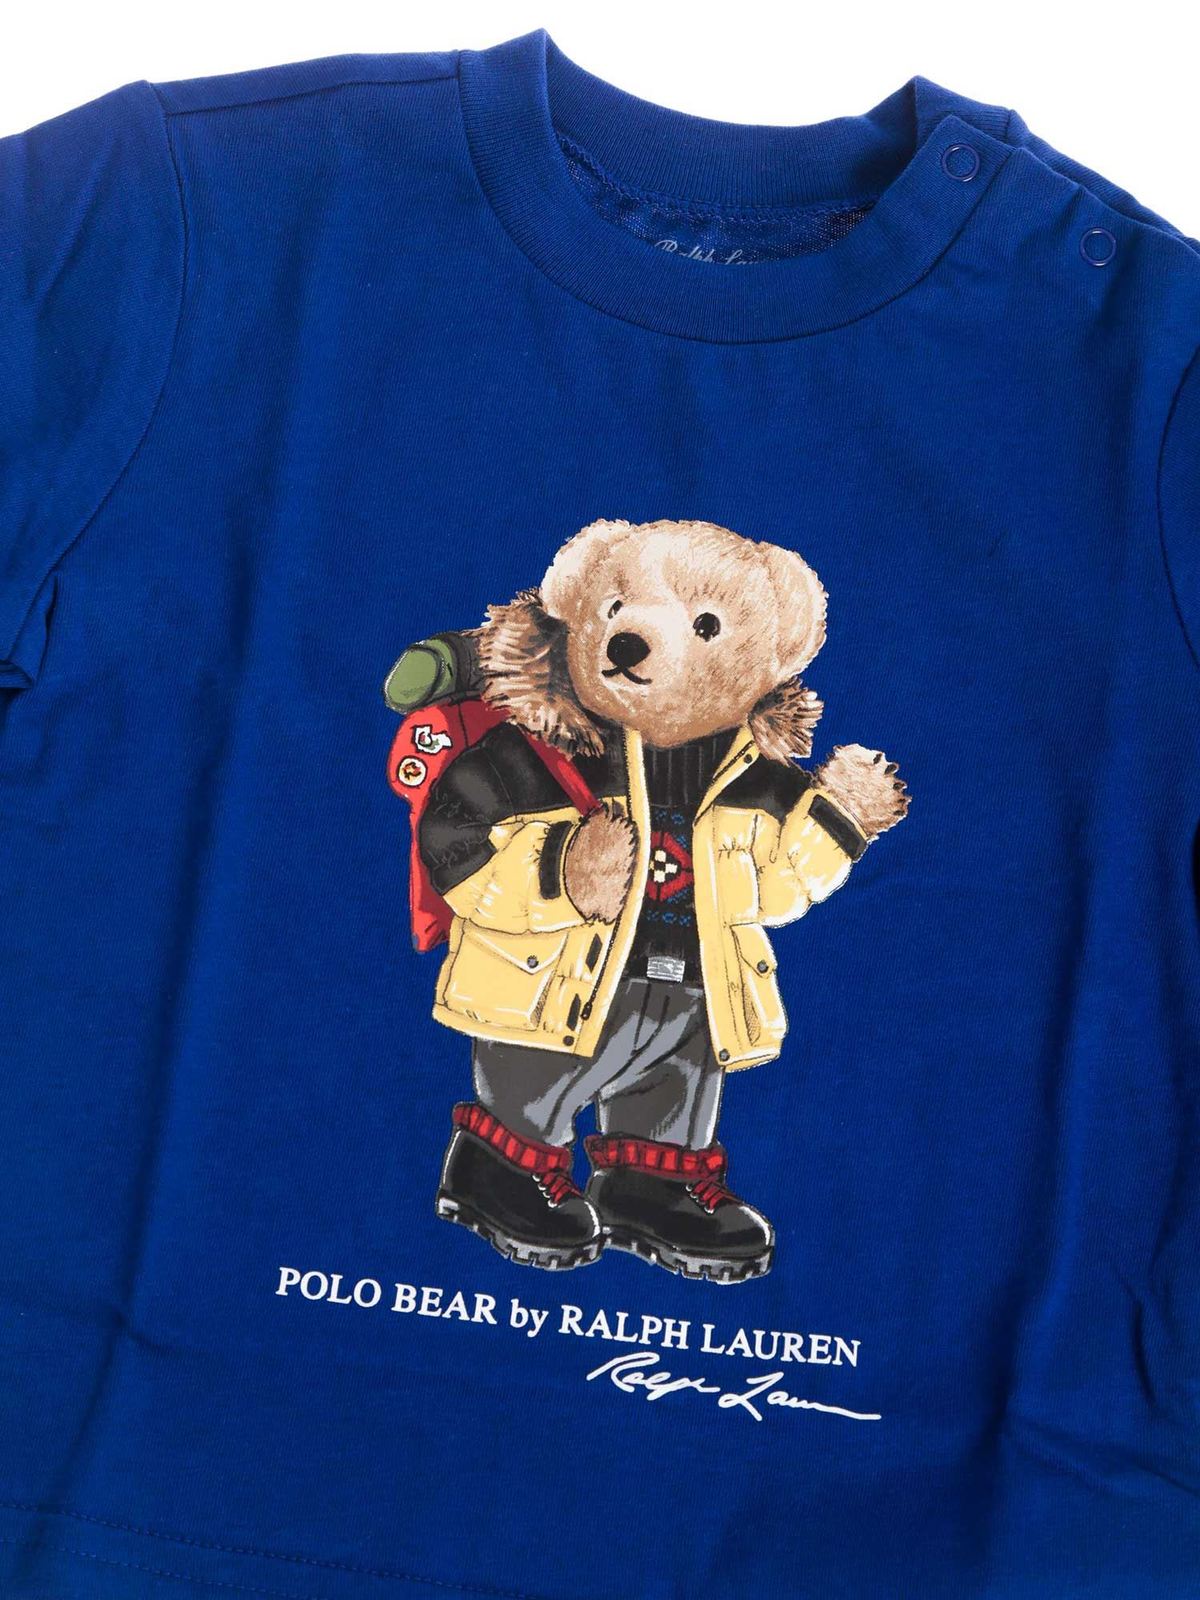 Ralph Lauren Polo Bear T Shirt For Salesave Up To 17 